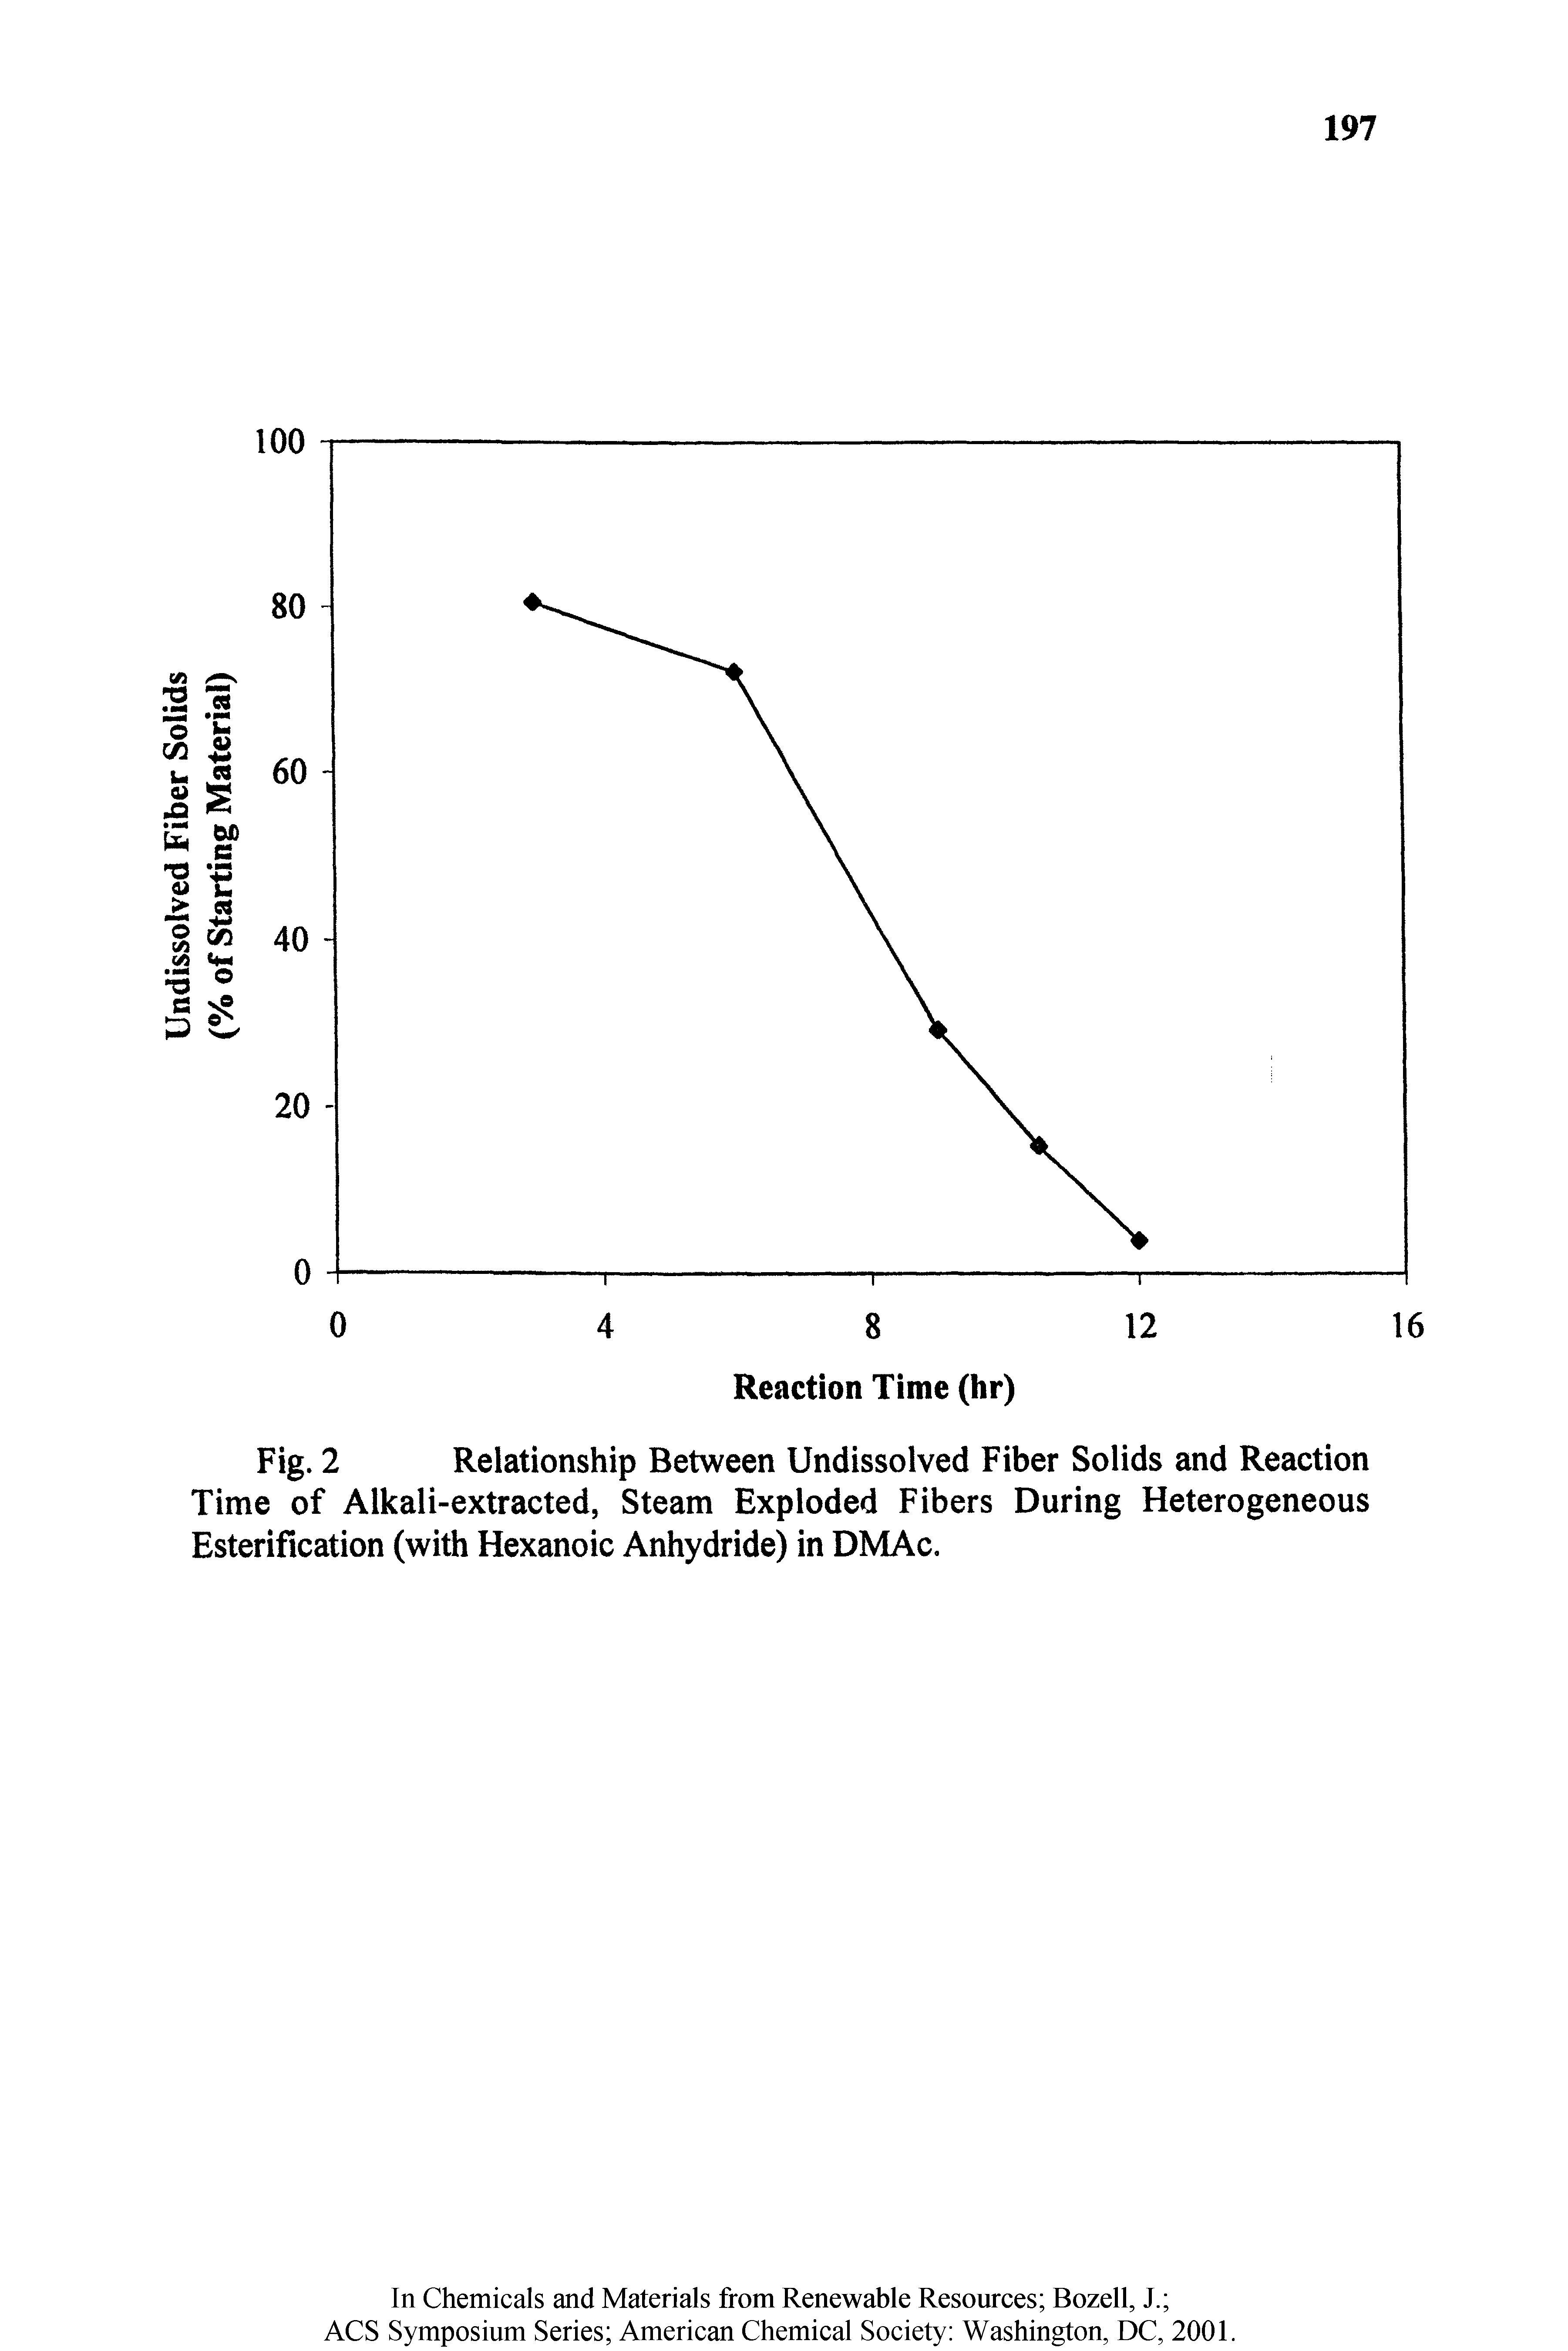 Fig. 2 Relationship Between Undissolved Fiber Solids and Reaction Time of Alkali-extracted, Steam Exploded Fibers During Heterogeneous Esterification (with Hexanoic Anhydride) in DMAc.